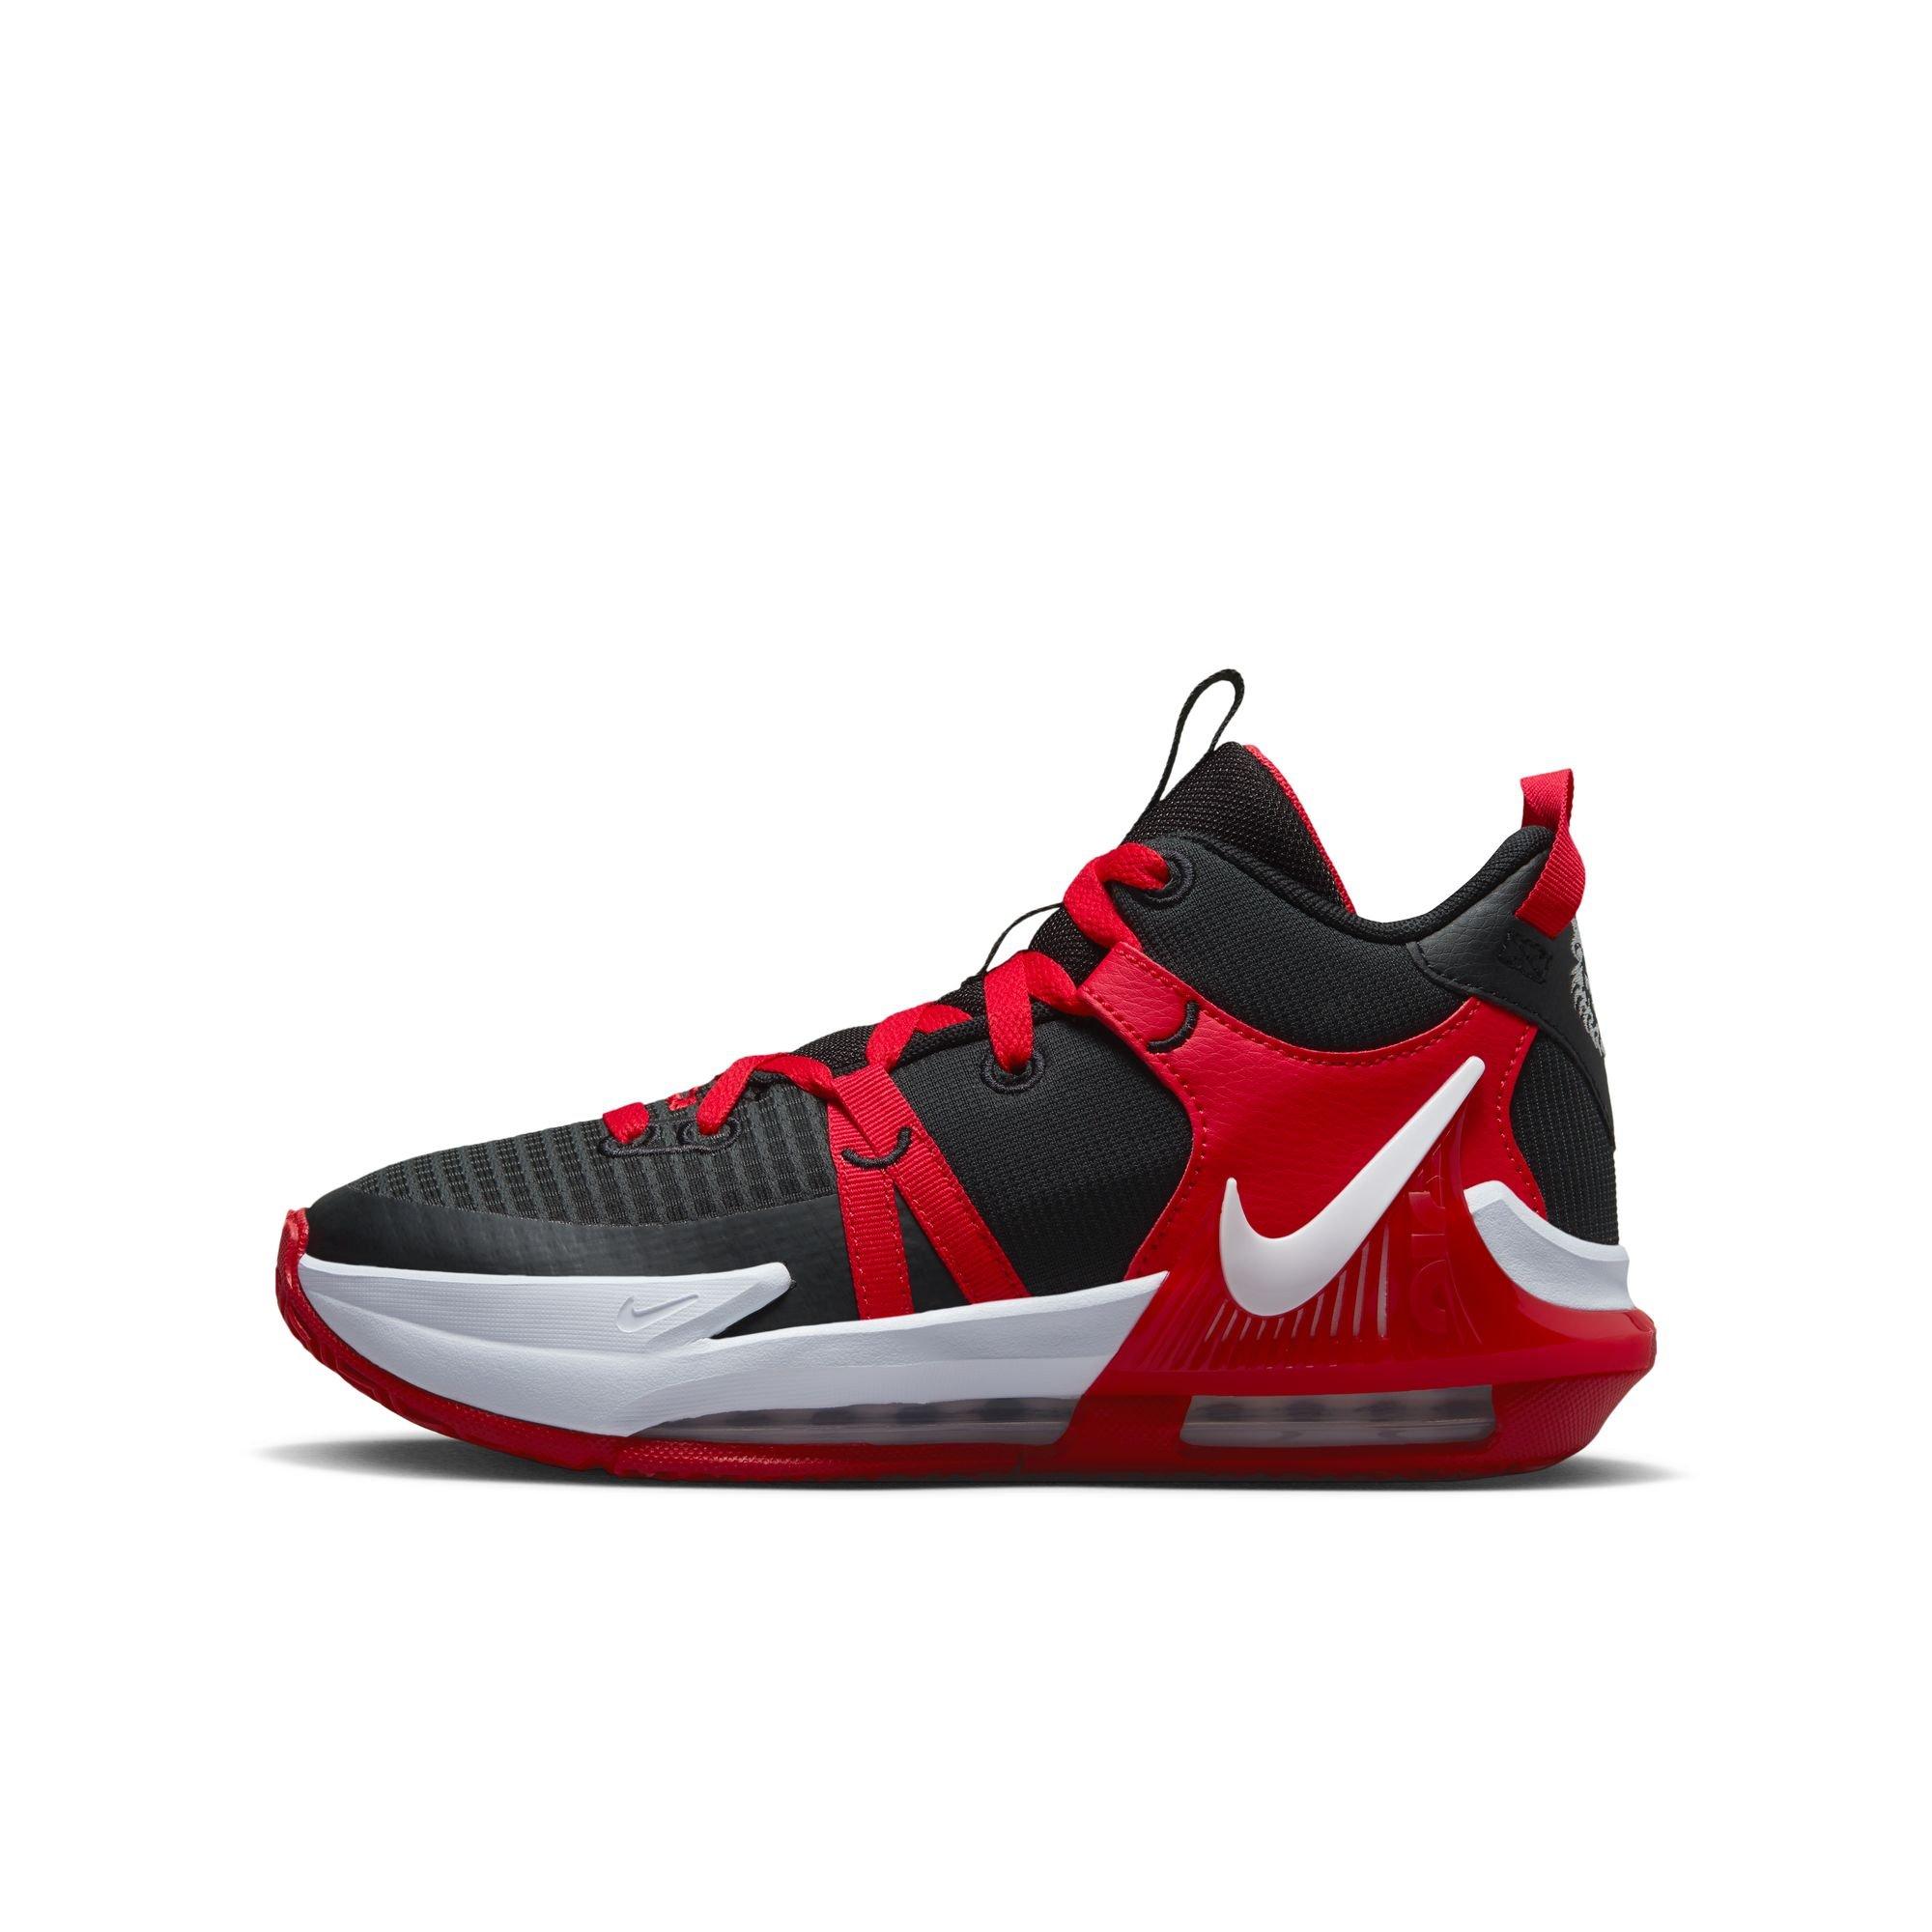 lebron shoes red black and white